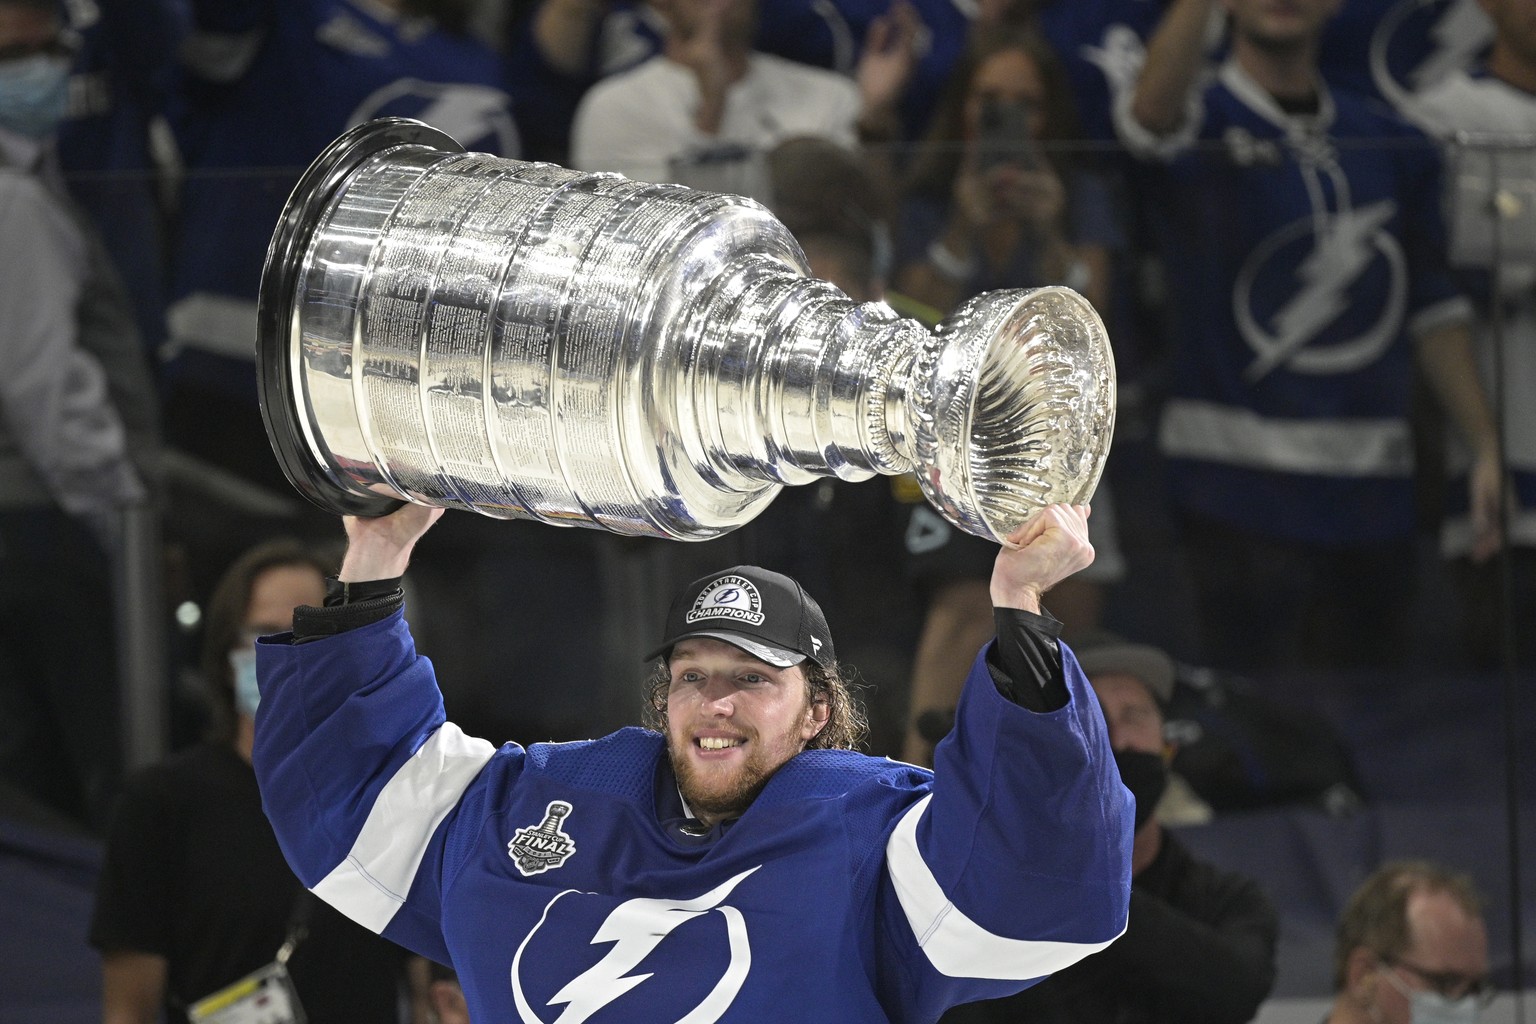 Tampa Bay Lightning goaltender Andrei Vasilevskiy hoists the Stanley Cup after the team defeated the Montreal Canadiens in Game 5 of the NHL hockey Stanley Cup finals, Wednesday, July 7, 2021, in Tamp ...